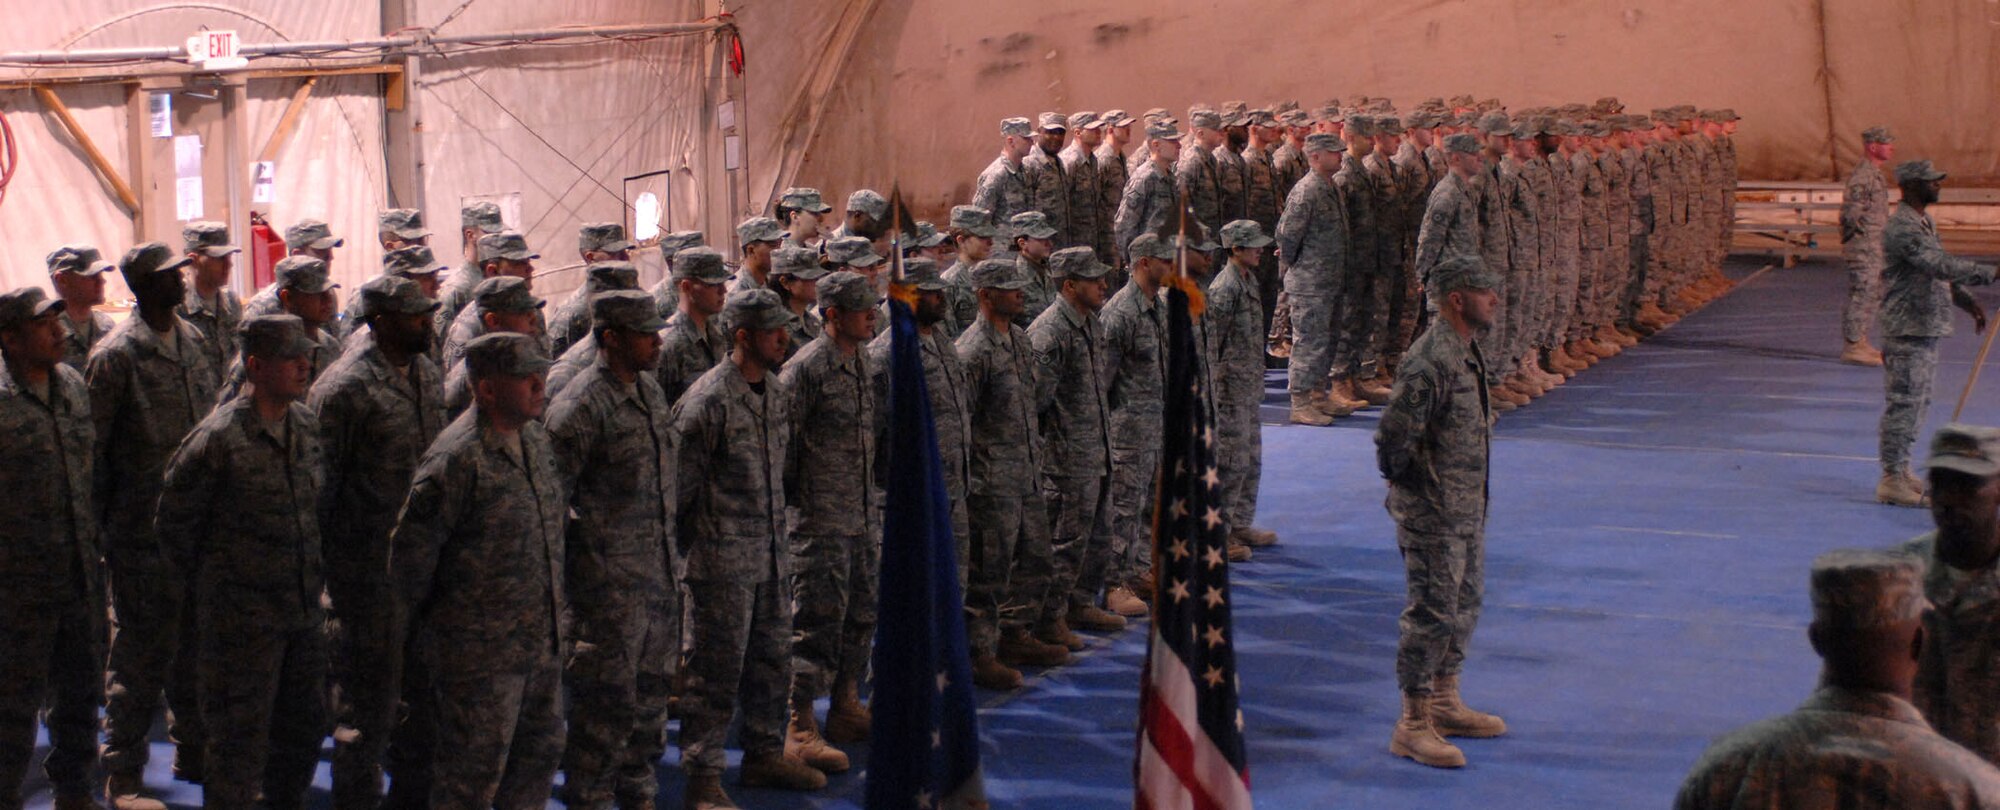 Members of the 755th Expeditionary Security Forces Squadron stand together for the last time Jan. 11 at Bagram Air Base, Afghanistan. The squadron, originally formed in May 2006 in response to a Army request for support of its detainee operations mission, was inactivated during a formal ceremony Jan. 11 here. (U.S. Air Force photo/Staff Sgt. Mike Andriacco) 
